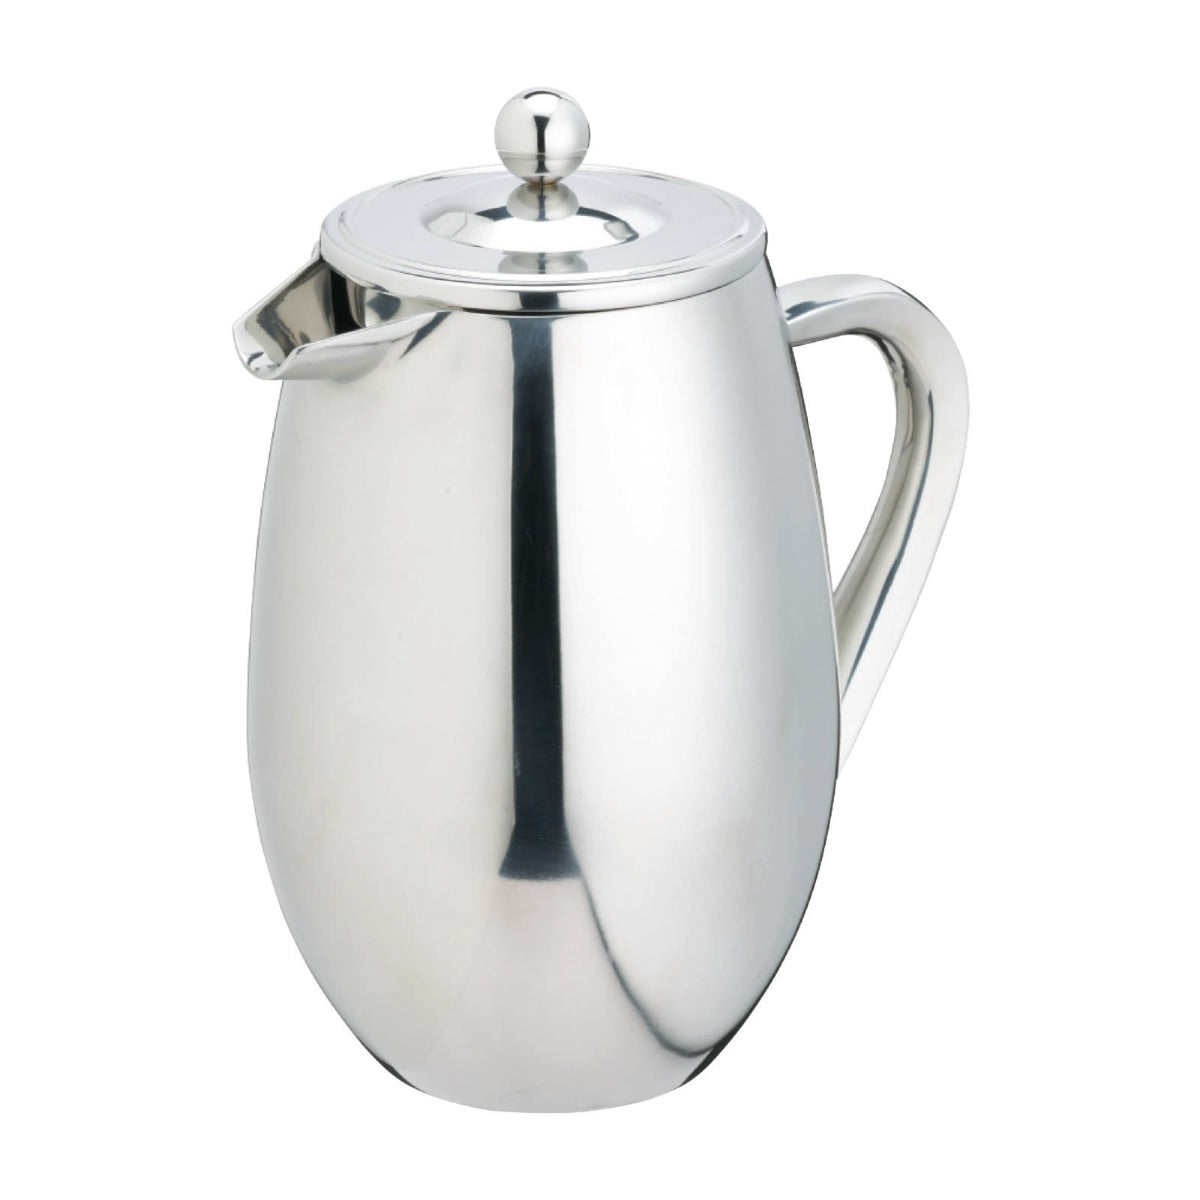 Le'Xpress Double Walled Stainless Steel Cafetiere 8 Cup